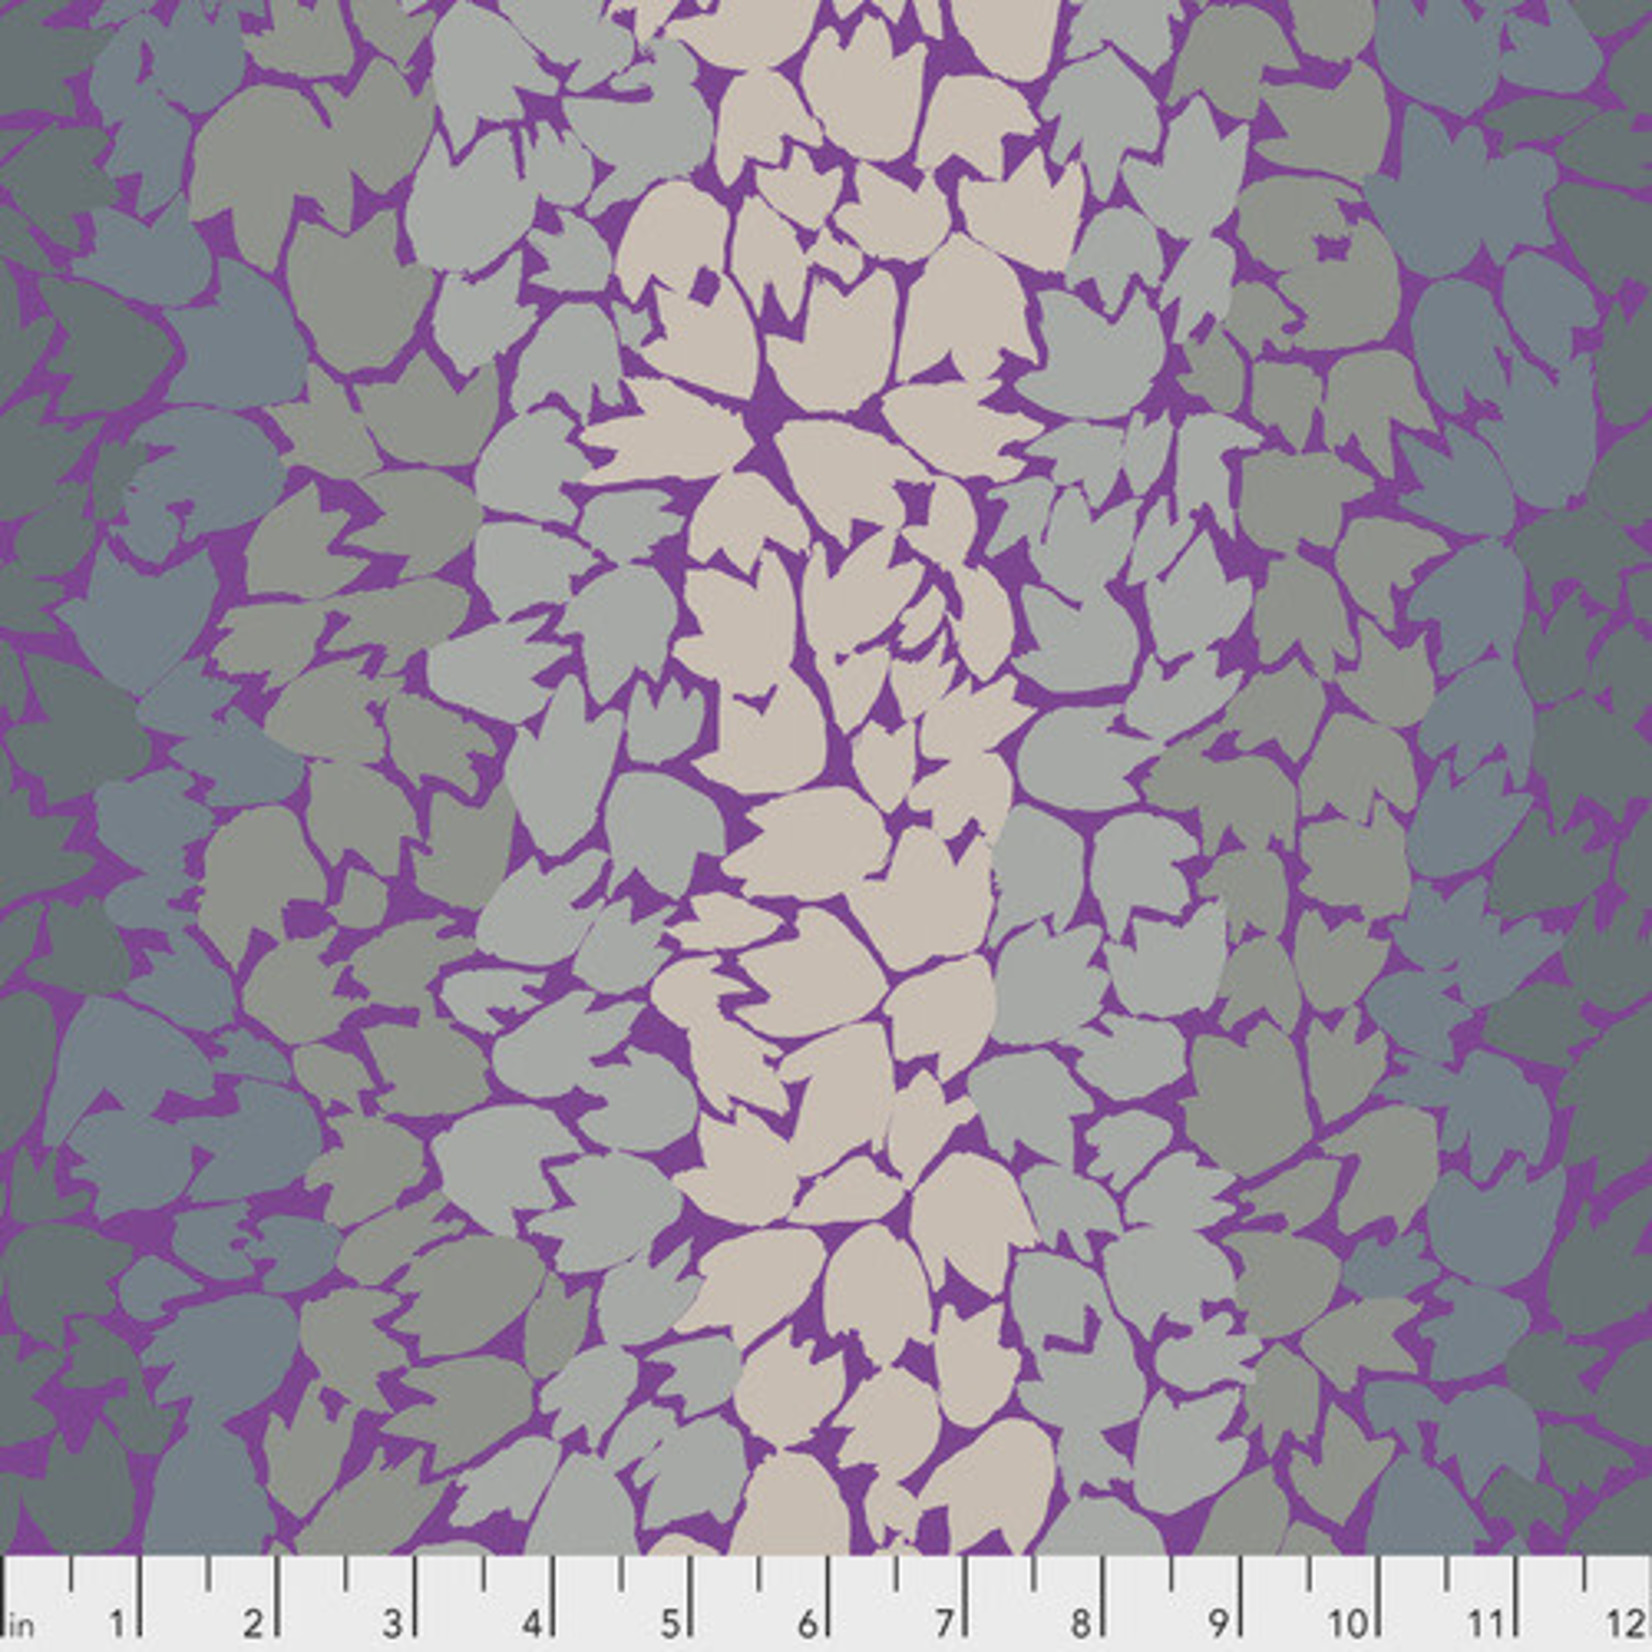 Kaffe Fassett KF Collective - Ombre Leaves, Grey (PWGP174.GREY) $0.18 per cm or $18/m